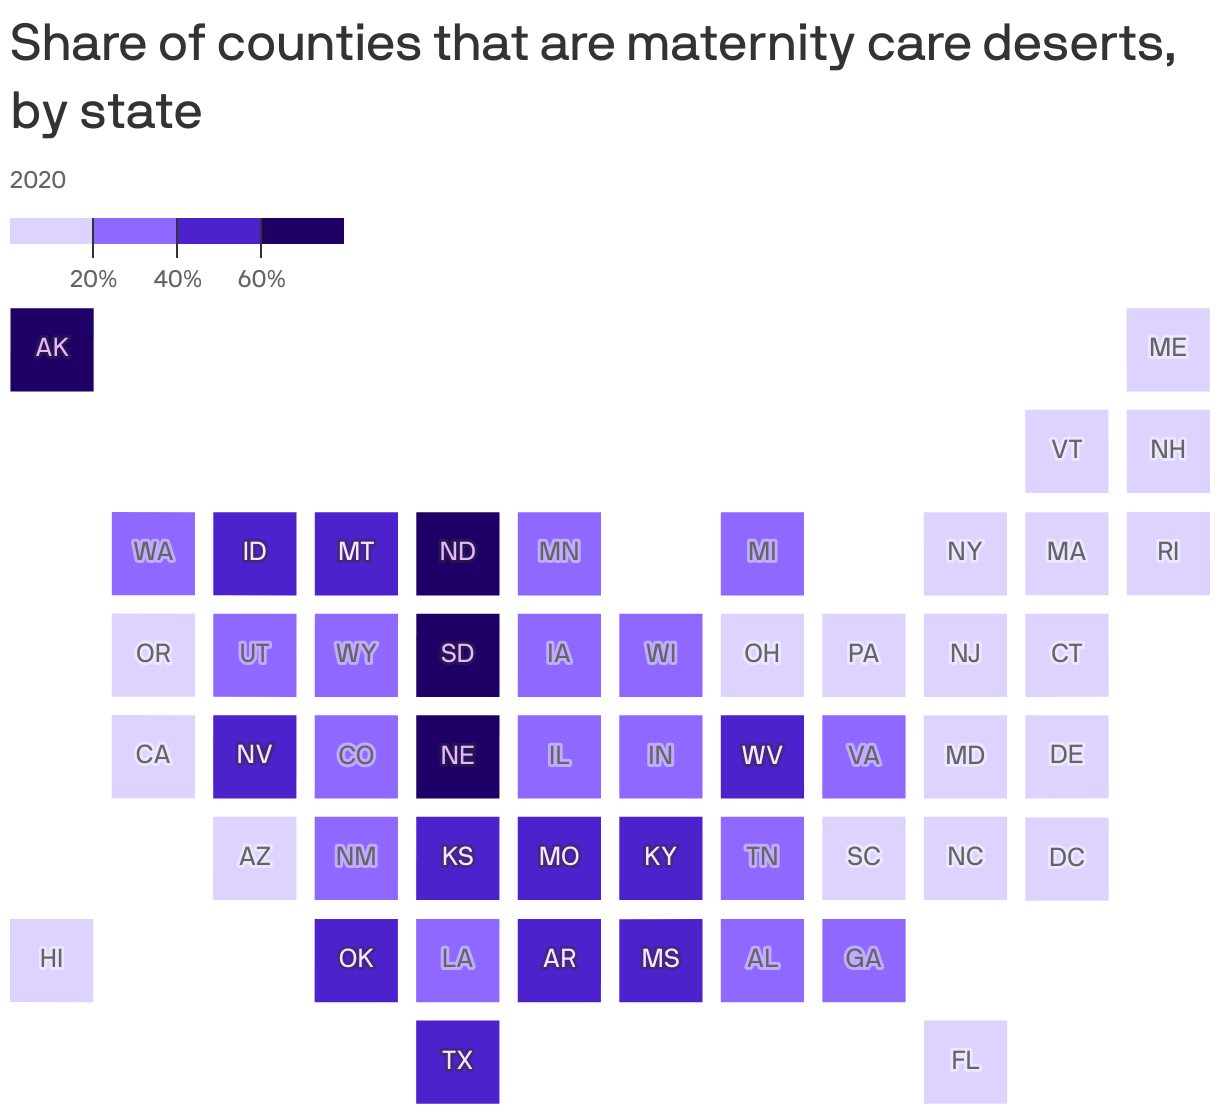 Share of counties that are maternity care deserts, by state